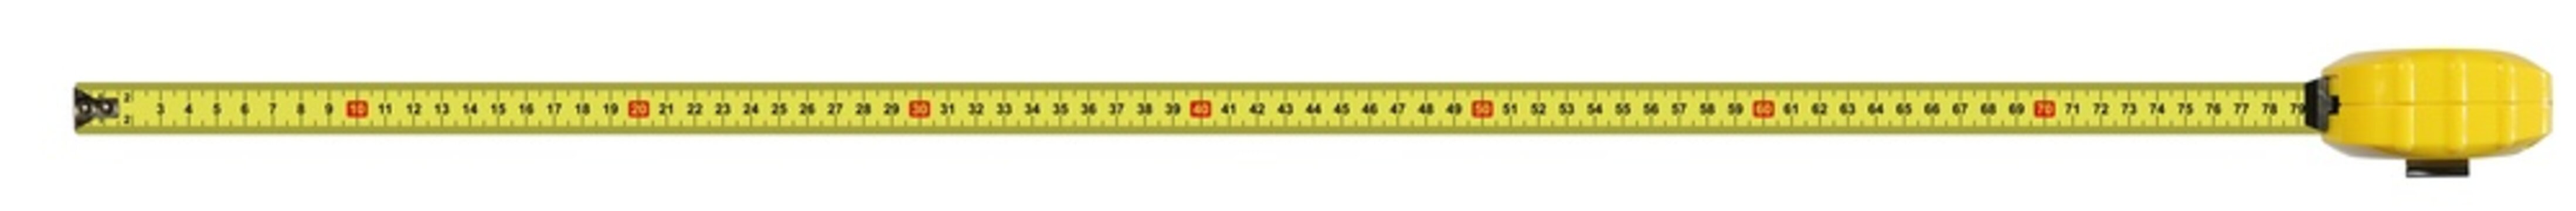 Tape measure - Super high resolution. Perfect focus 68 Mpx